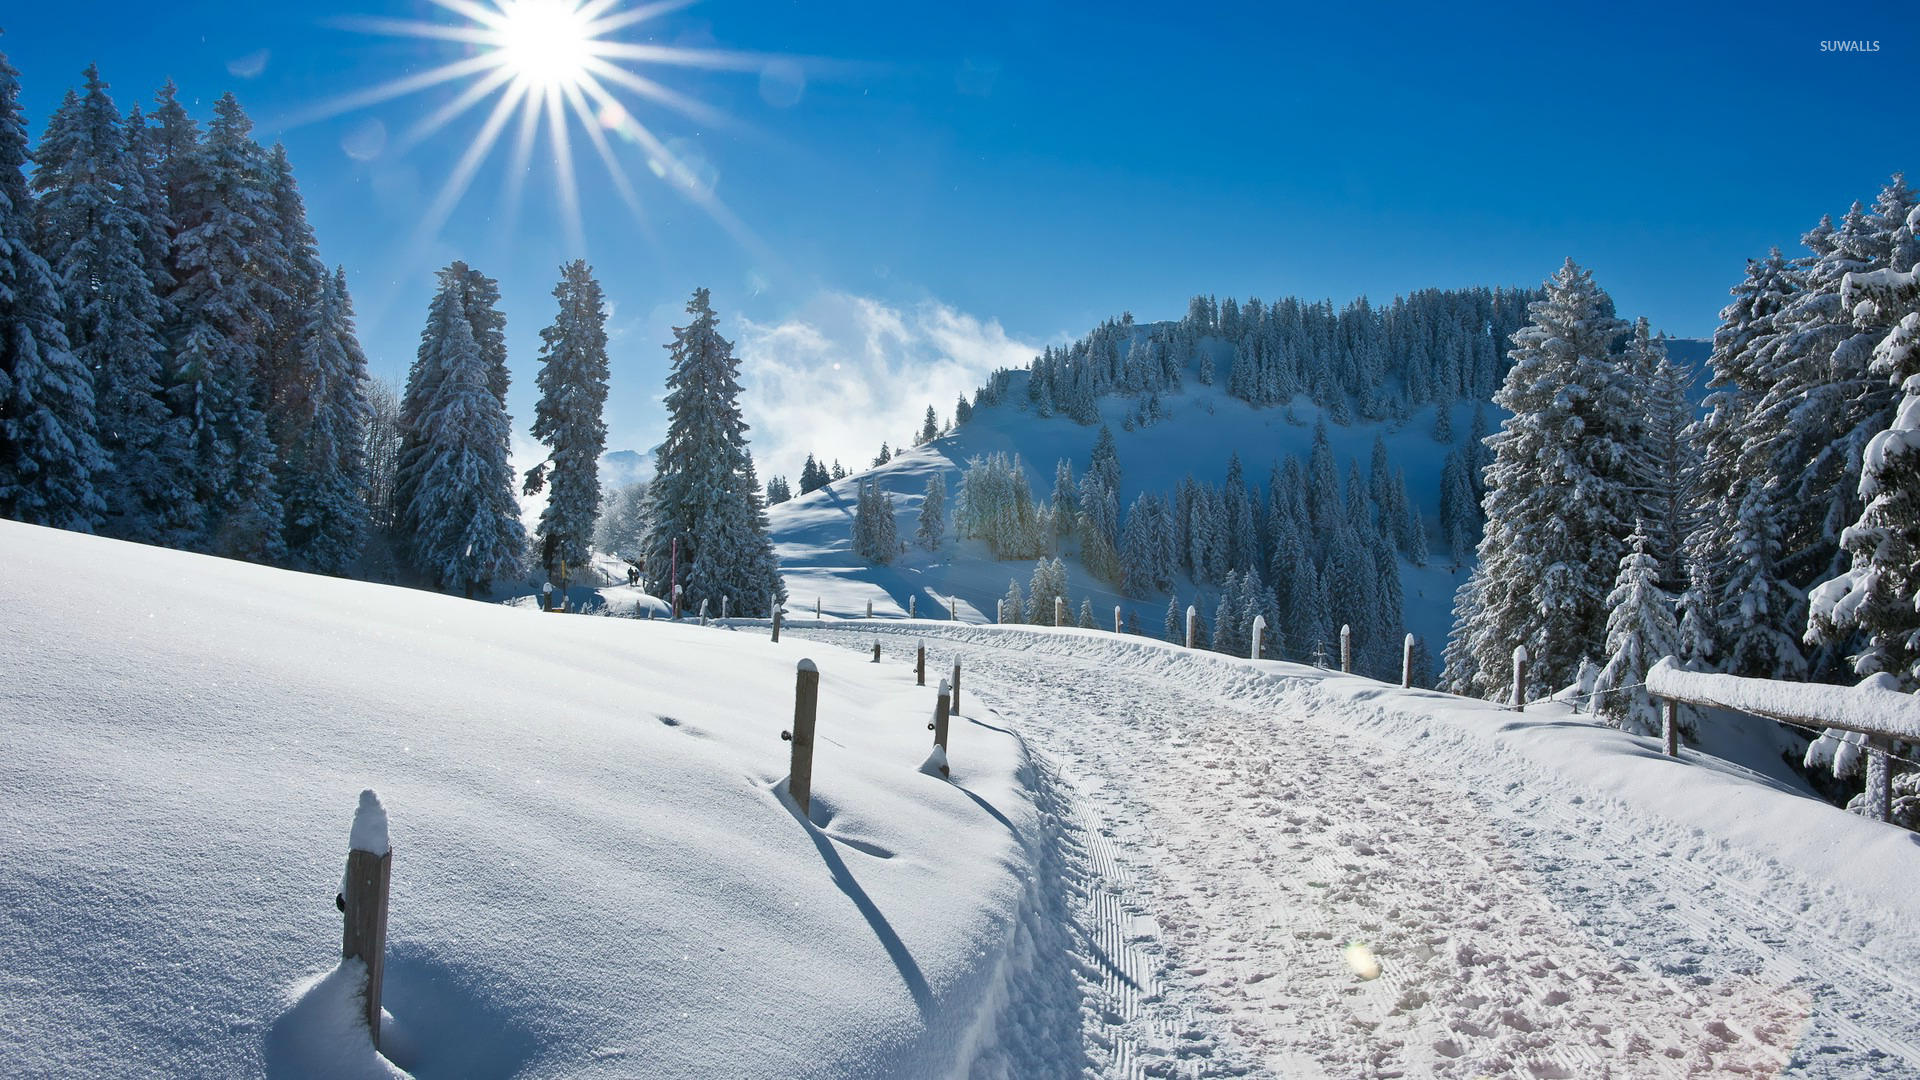 Sunny winter wallpaper   Nature wallpapers   16472